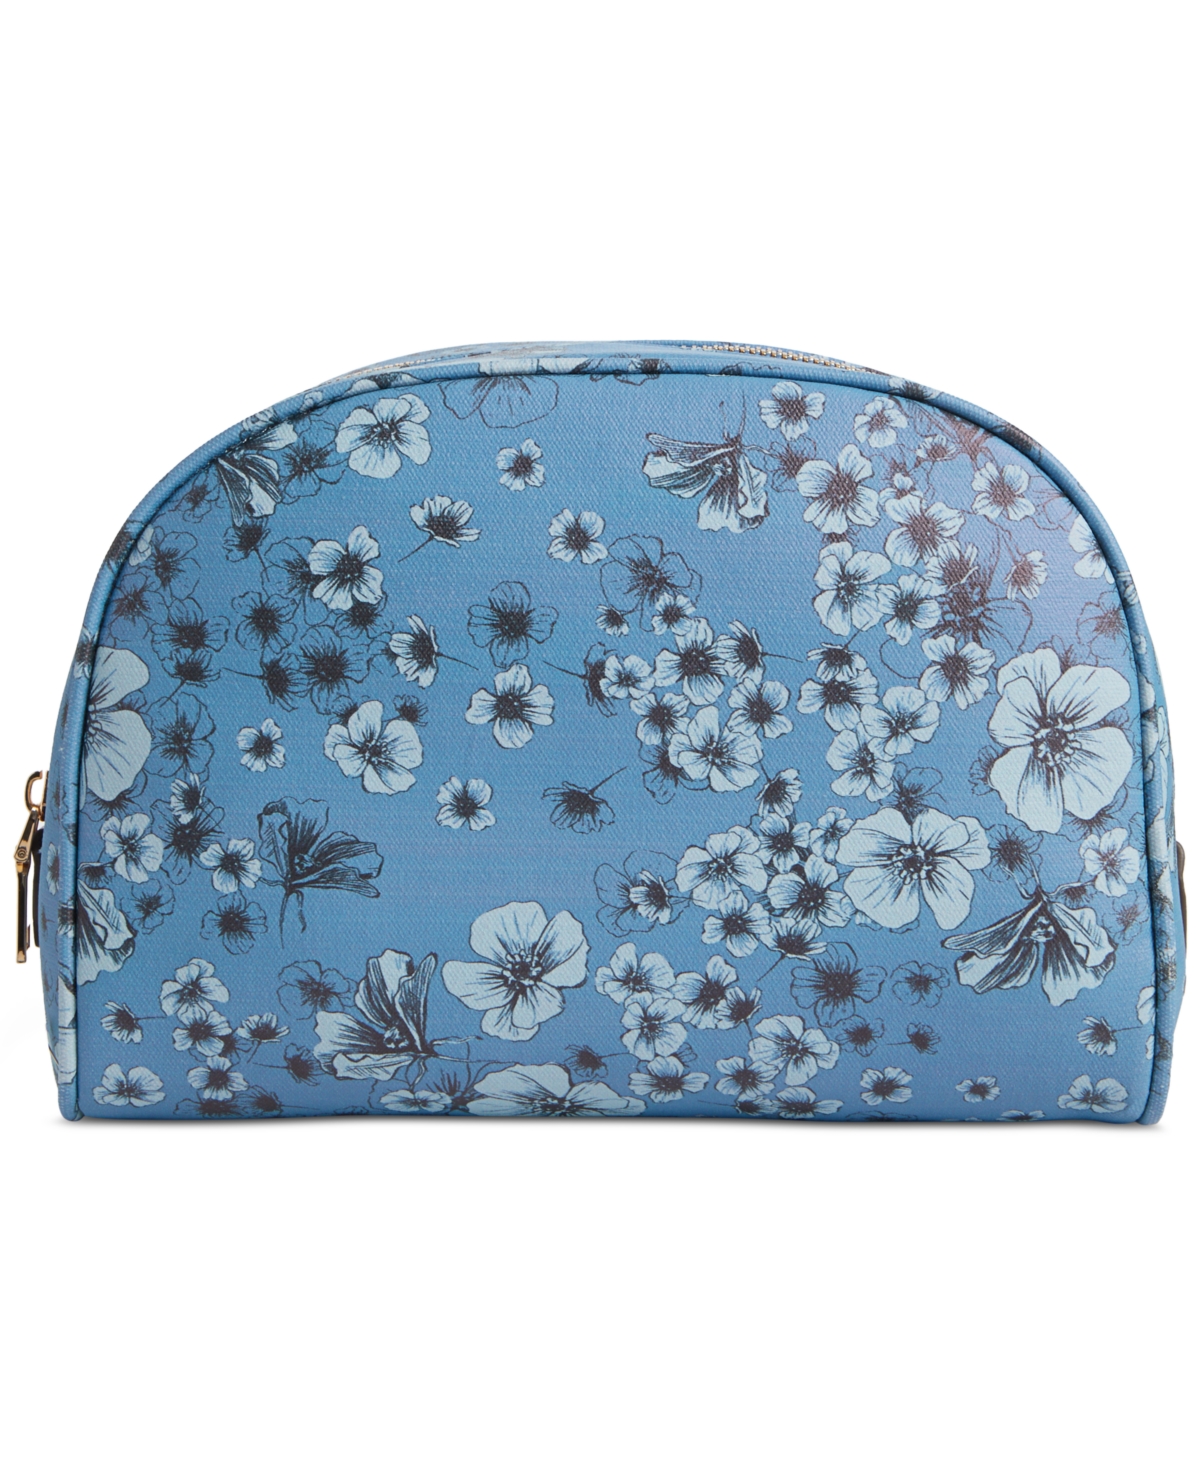 Flower Show Large Canvas Dome Pouch, Created for Macy's - Blue Floral Multi